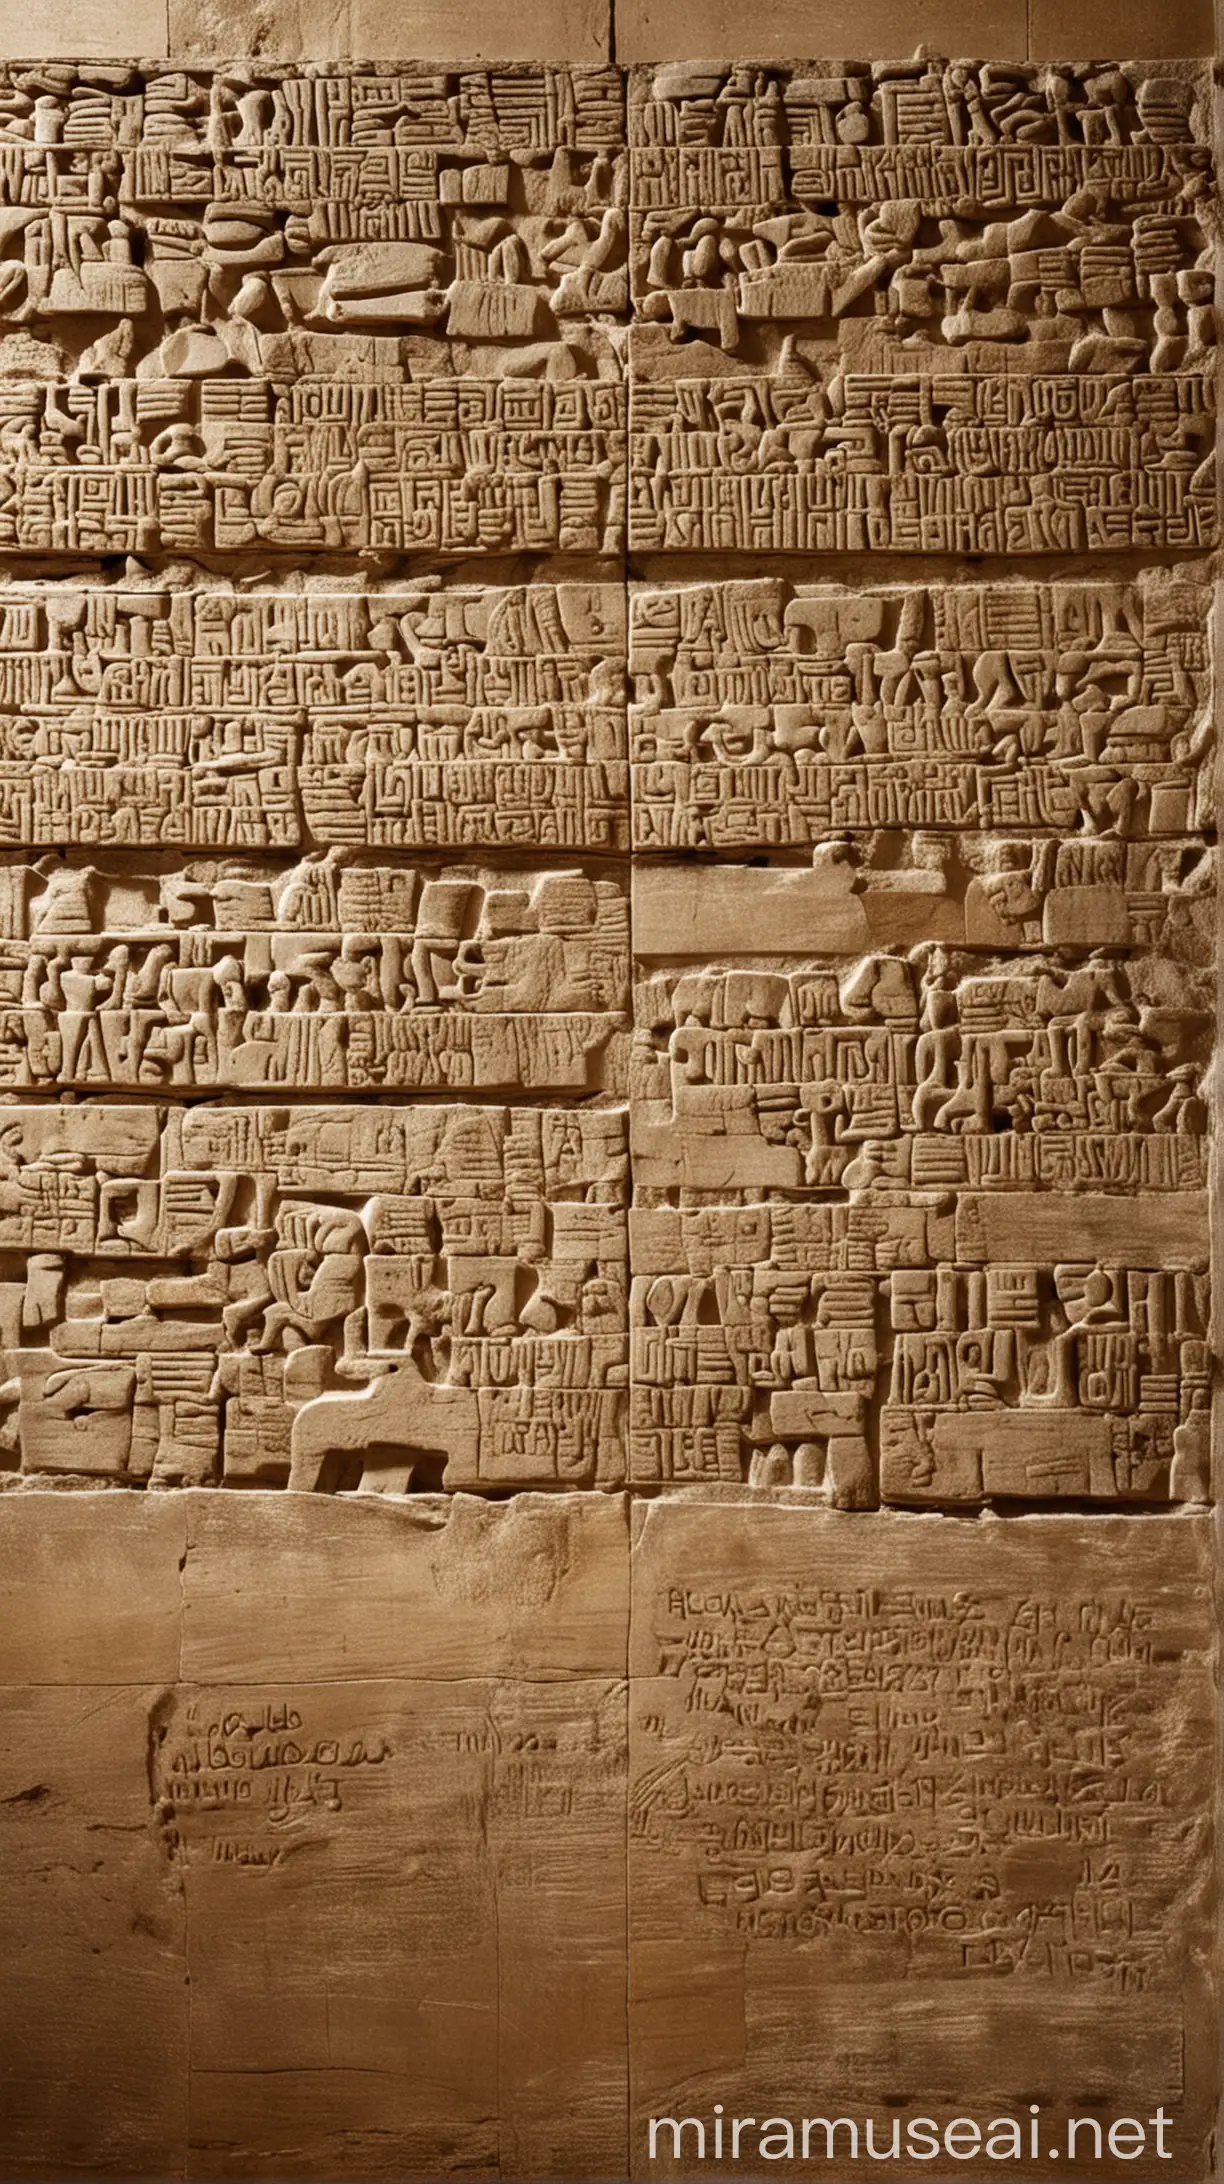 A split-screen image showing the cryptic message on the wall ('Mene, Mene, Tekel, Parsin') alongside Daniel's interpretation of its meaning ('God has numbered your kingdom...'). The background should feature a subtle pattern or design reflecting ancient Babylonian culture."In ancient world 